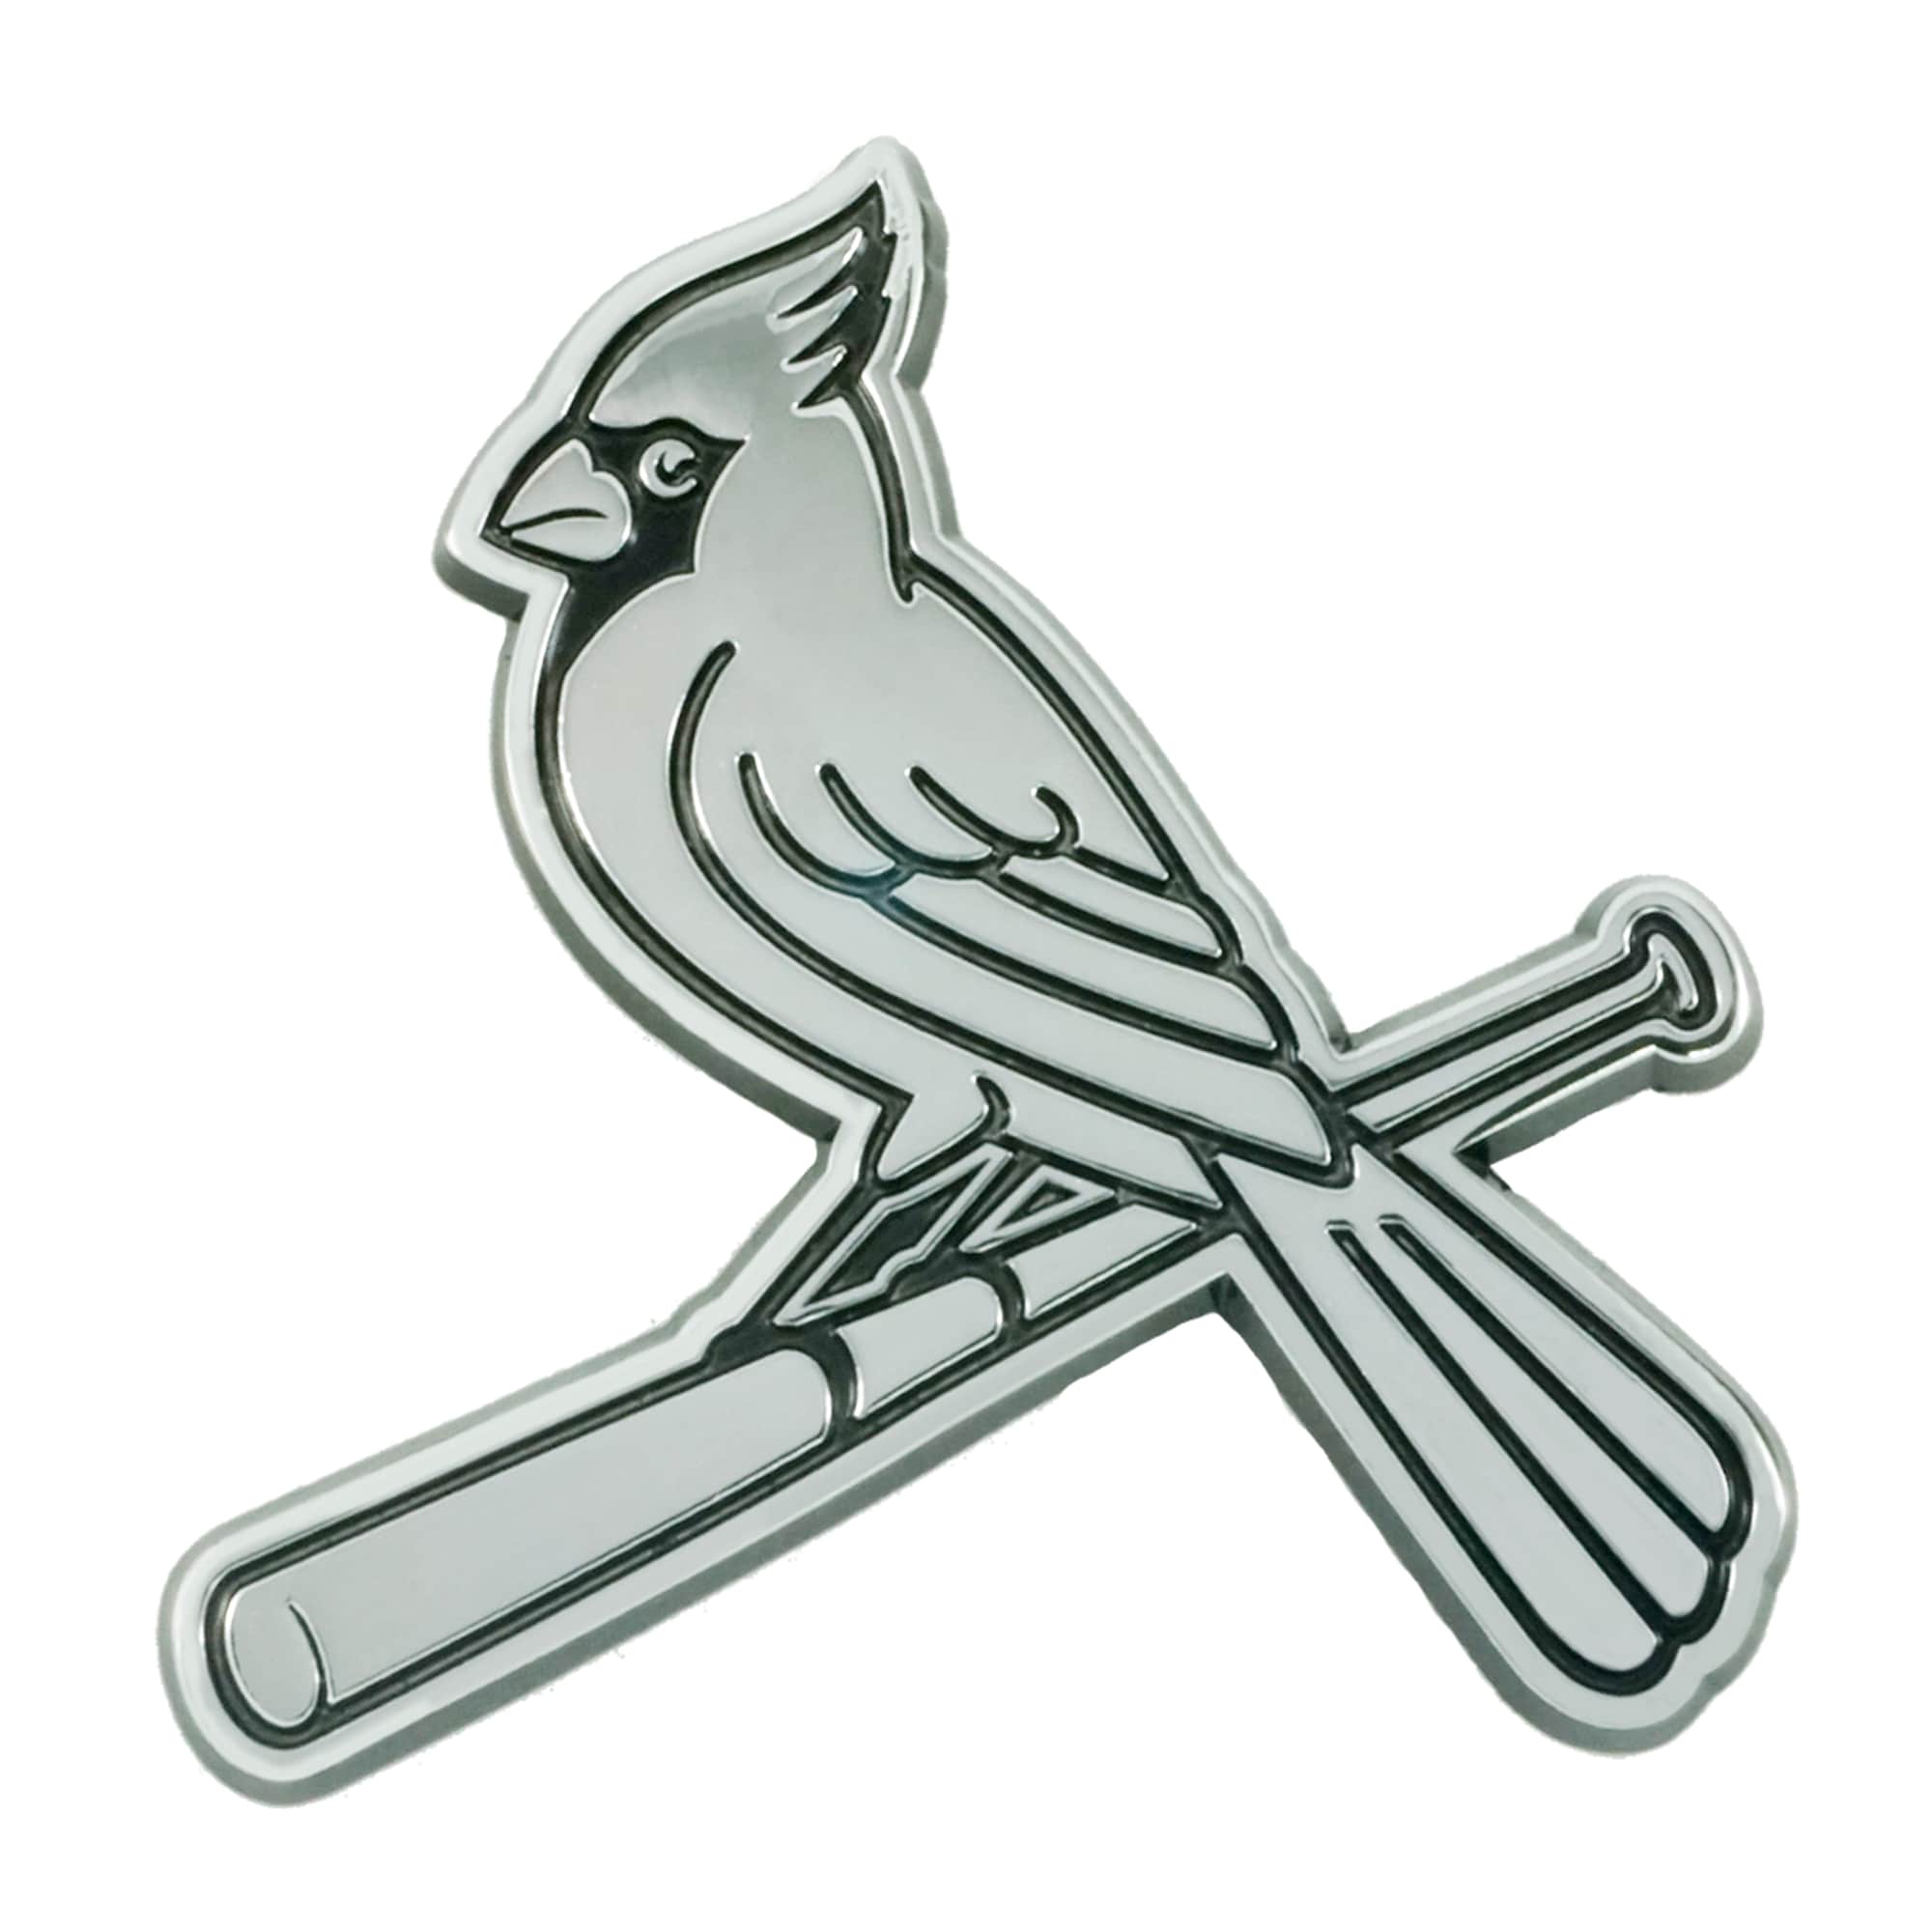 St Louis Cardinals Baseball Icons Pins Badge Decoration Brooches Metal Badges for Clothes Backpack